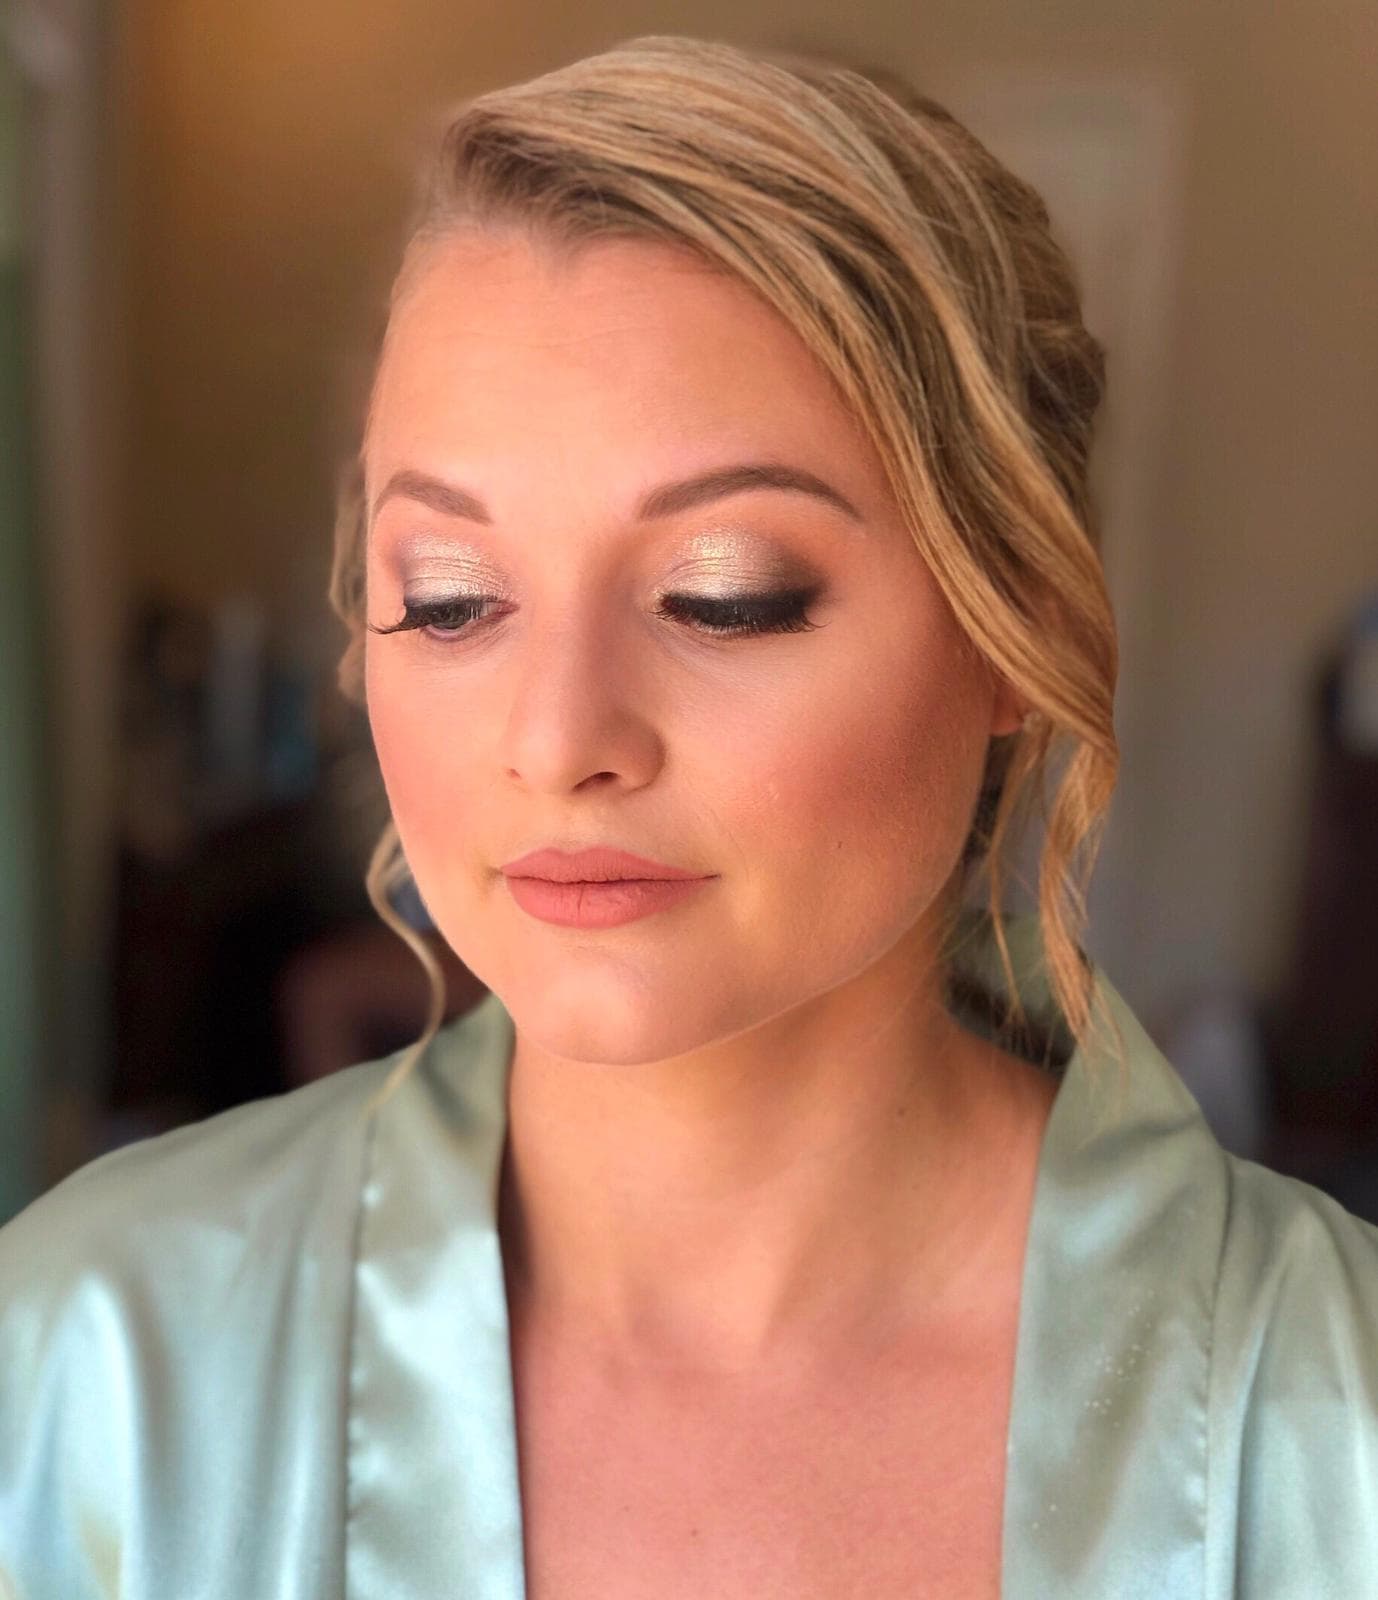 Wedding Makeup at Cantley House in Wokingham by Christiane Dowling Makeup Artistry